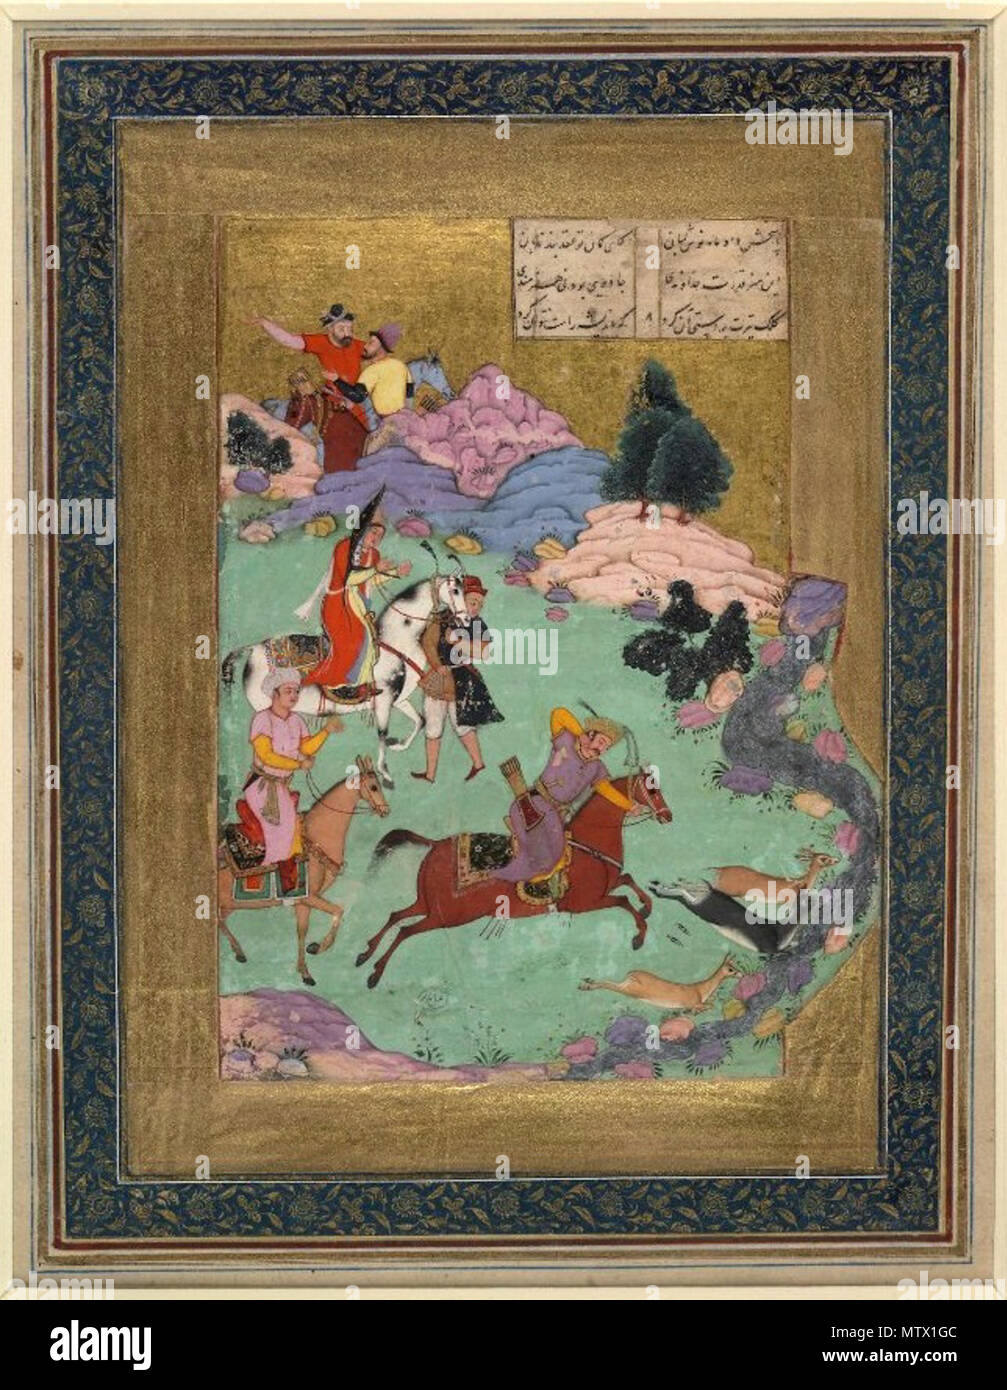 . English: Album leaf; painting depicts Bahram Gur (central figure) on horseback hunting three doe, from a Khamseh of Amir Khusrau Dihlavi. Behind the hunter stand two attendants on horseback, and one on foot. In the far distance two hunters stand behind a rocky hill. A stream, rocky hills, and minimal folliage decorate the background. Two columns, each composing of three lines of text, appear in the top right corner. Painted in opaque watercolours, gold leaf, and ink on paper. circa 1610. Amir Khusrau Dihlavi. 463 Painting depicts Bahram Gur (central figure) on horseback hunting three doe, fr Stock Photo